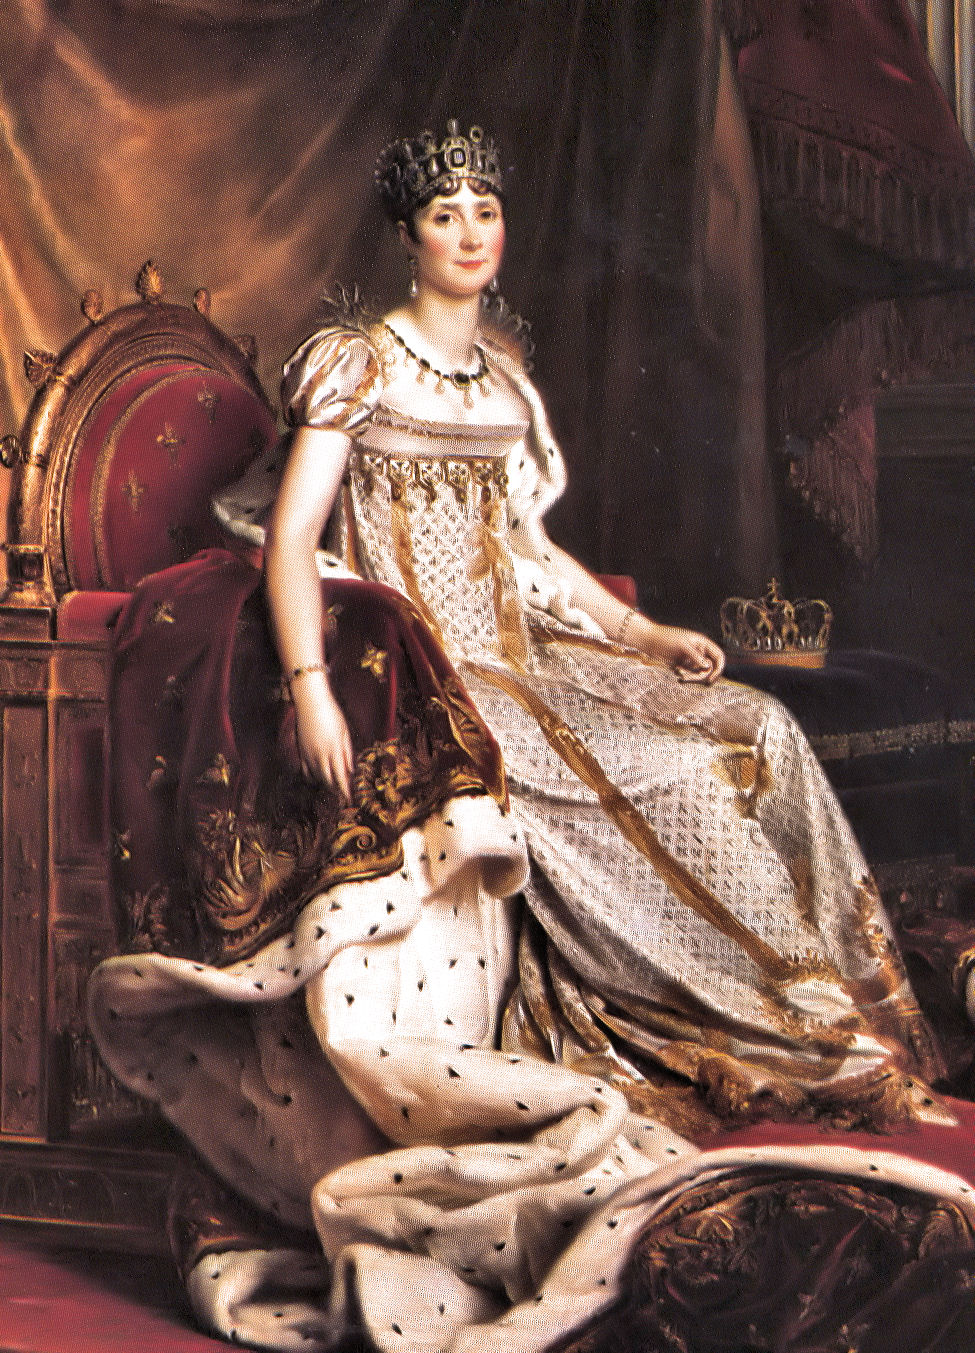 A painting of a woman in an ornate dress sitting on a throne, inspired by Napoleon-era fashion.